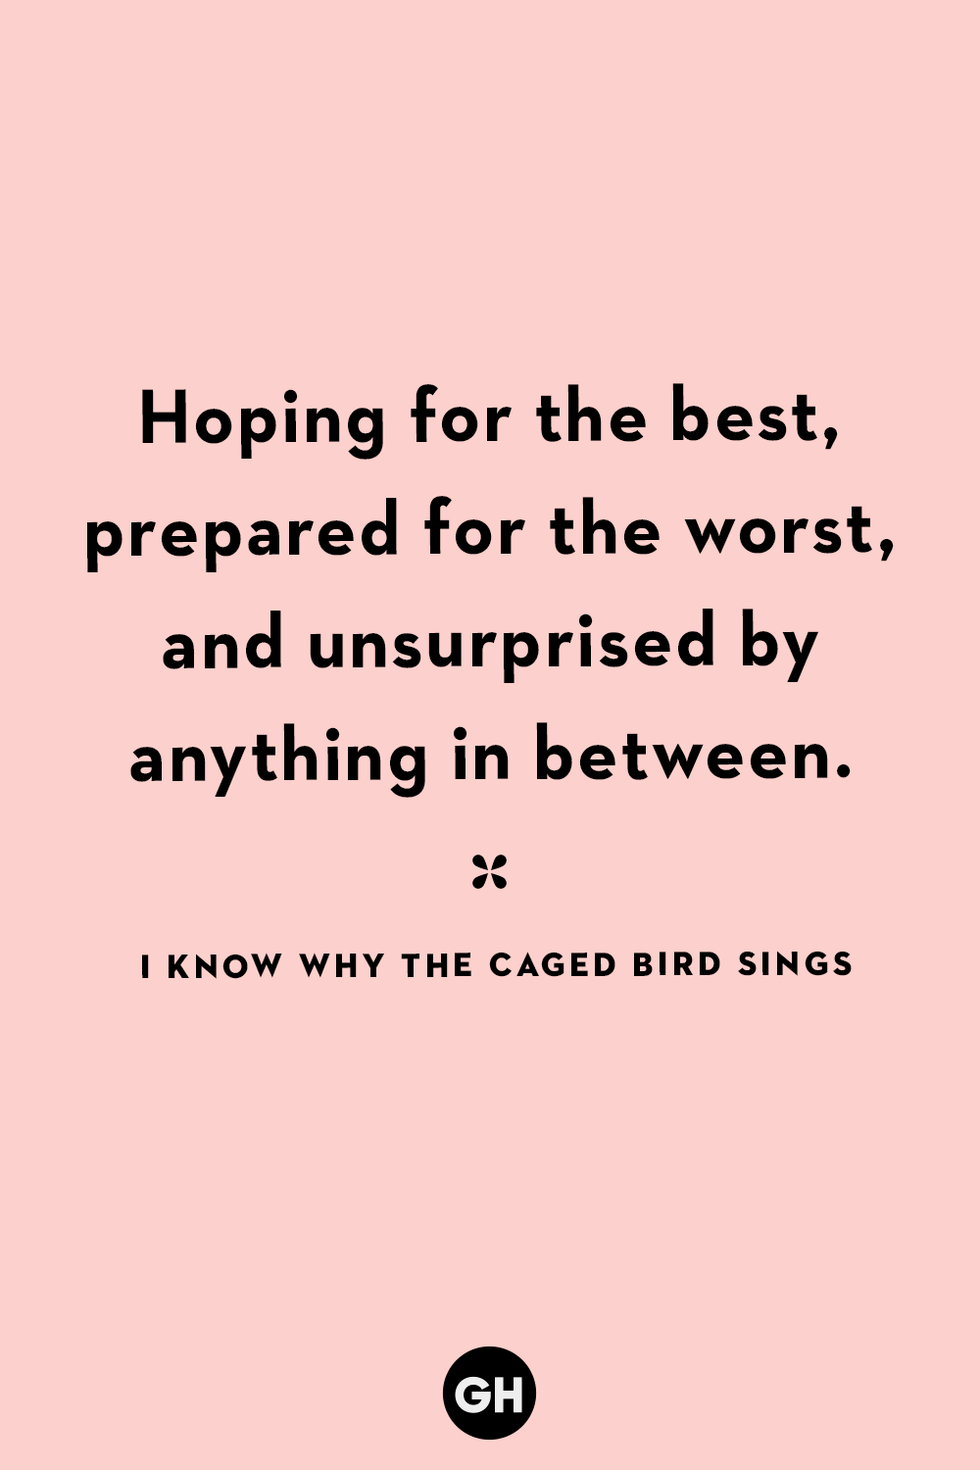 I Know Why the Caged Bird Sings Quotes: Inspirational Wisdom